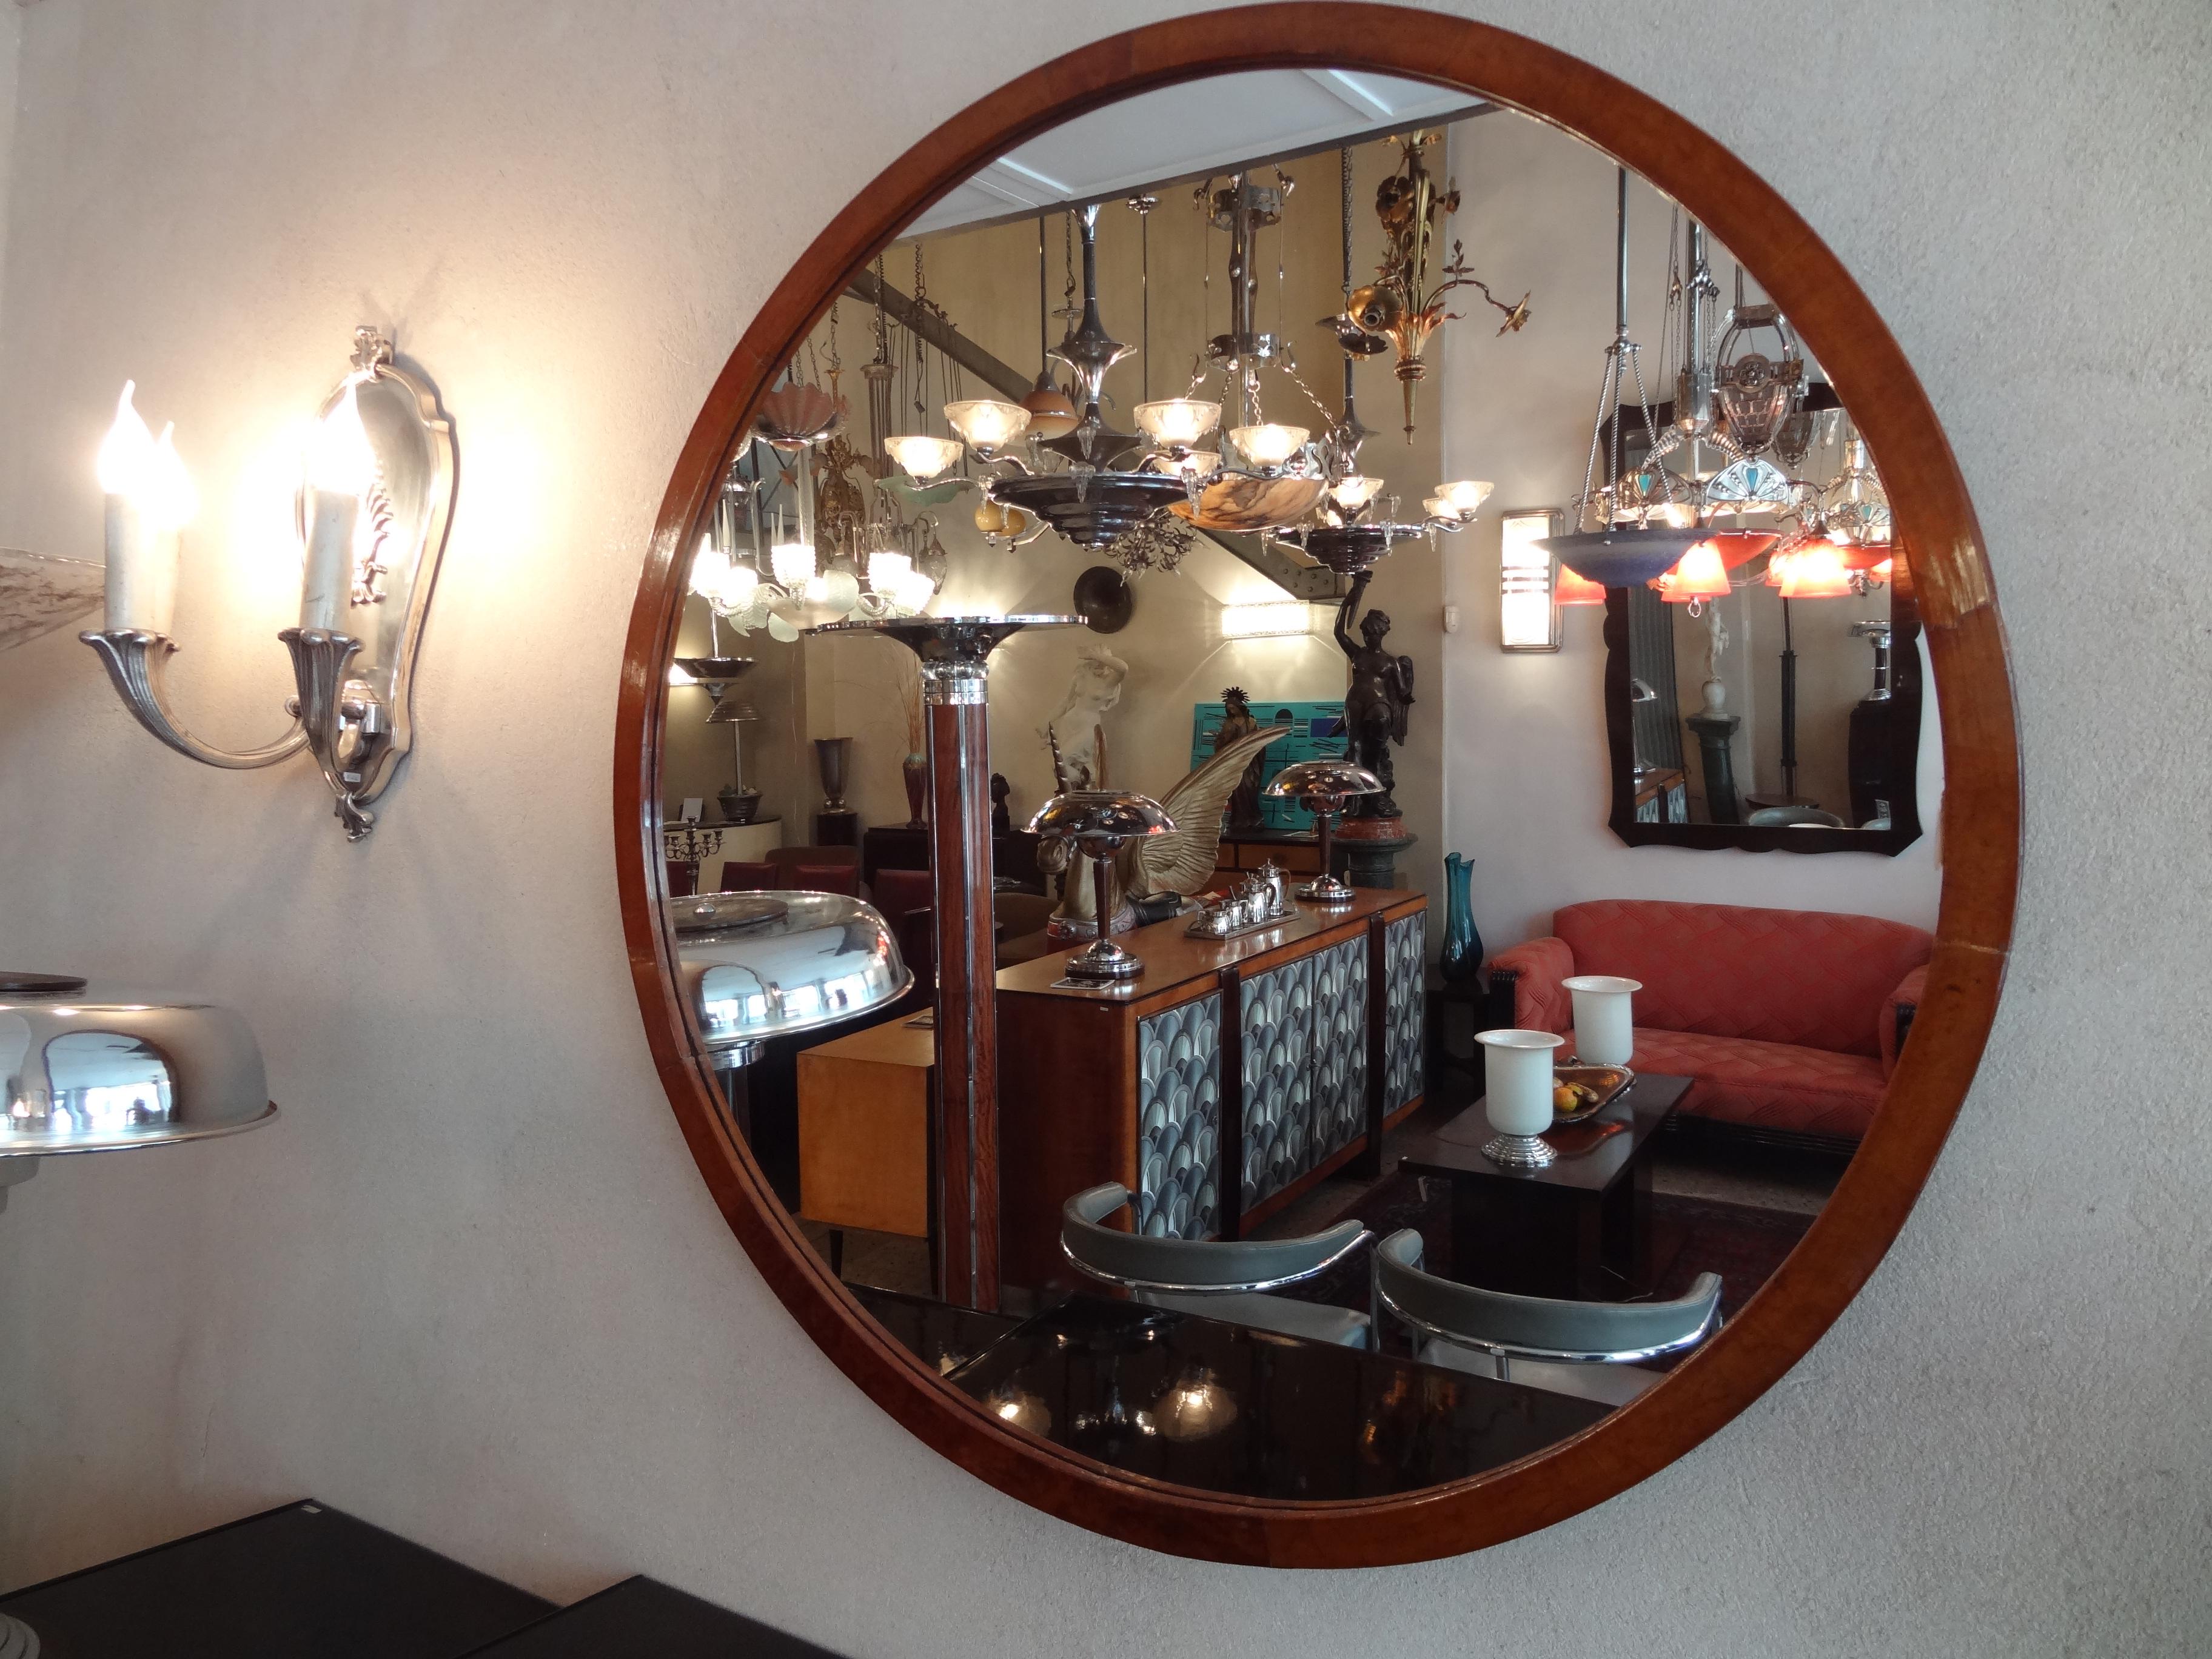 Amaizing mirror

Material: Wood and mirror
Style: Art Deco
Country: France
If you want to live in the golden years, this is the mirror that your project needs.
We have specialized in the sale of Art Deco and Art Nouveau and Vintage styles since